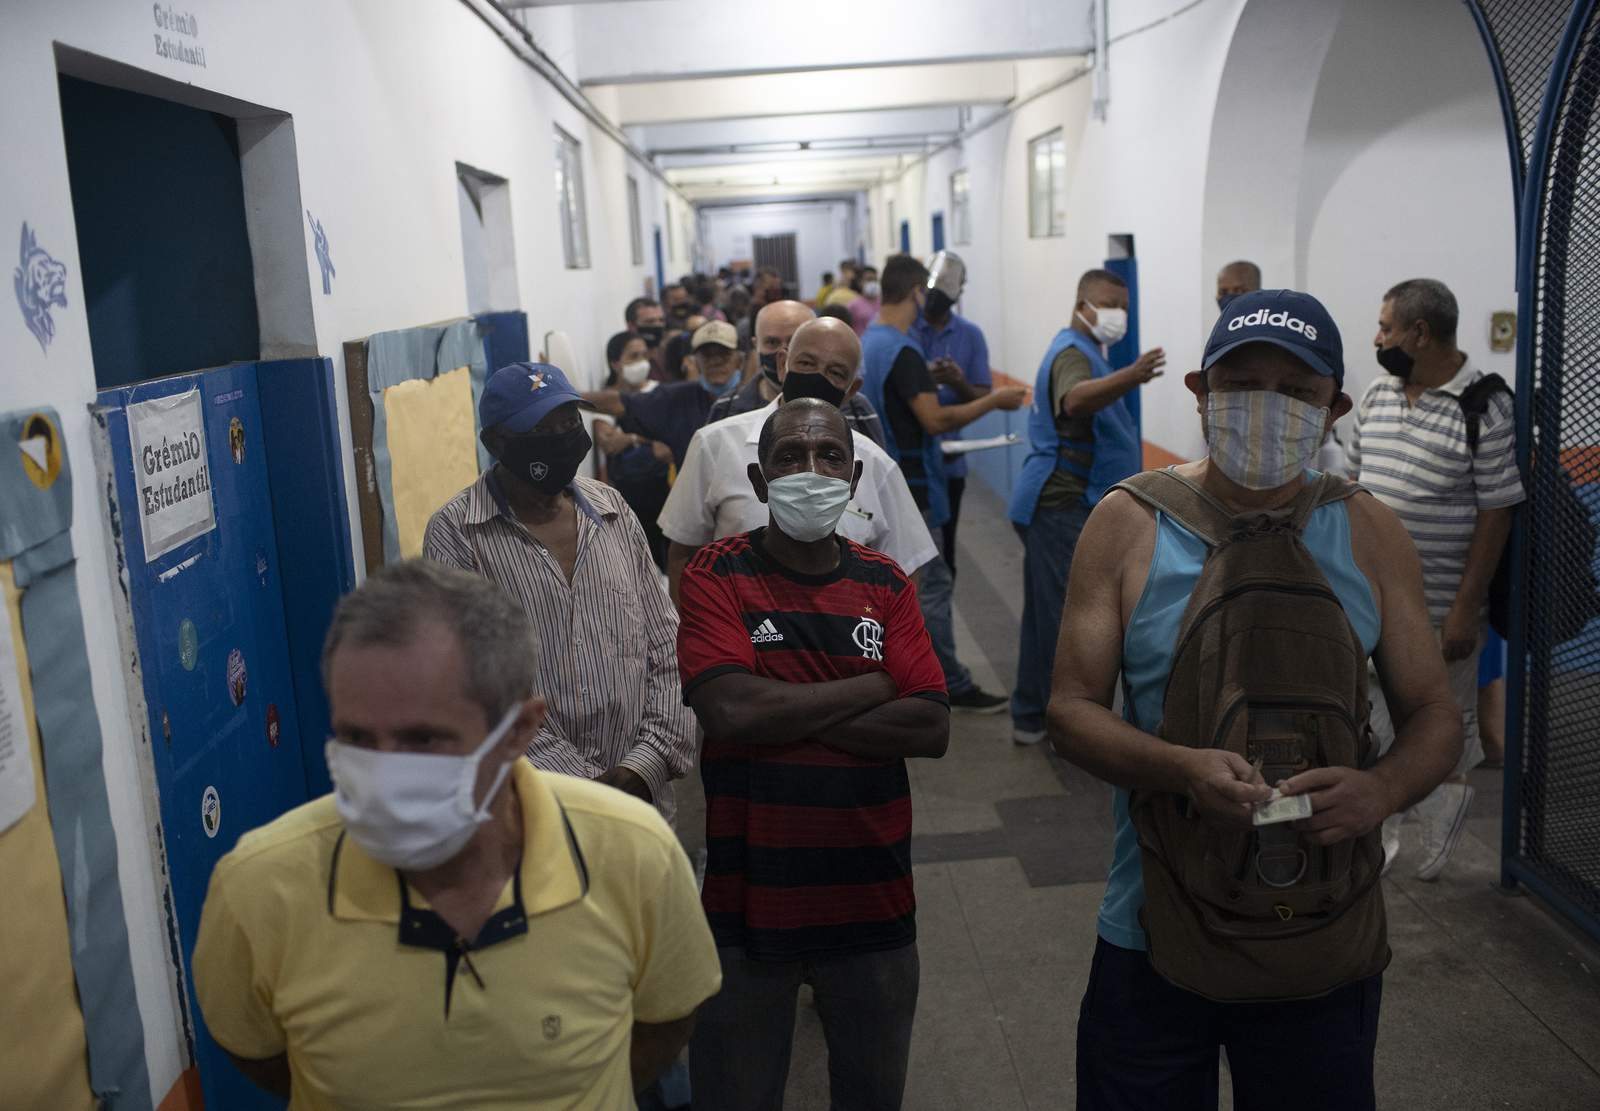 Brazil has surge of virus cases, downplayed by politicians